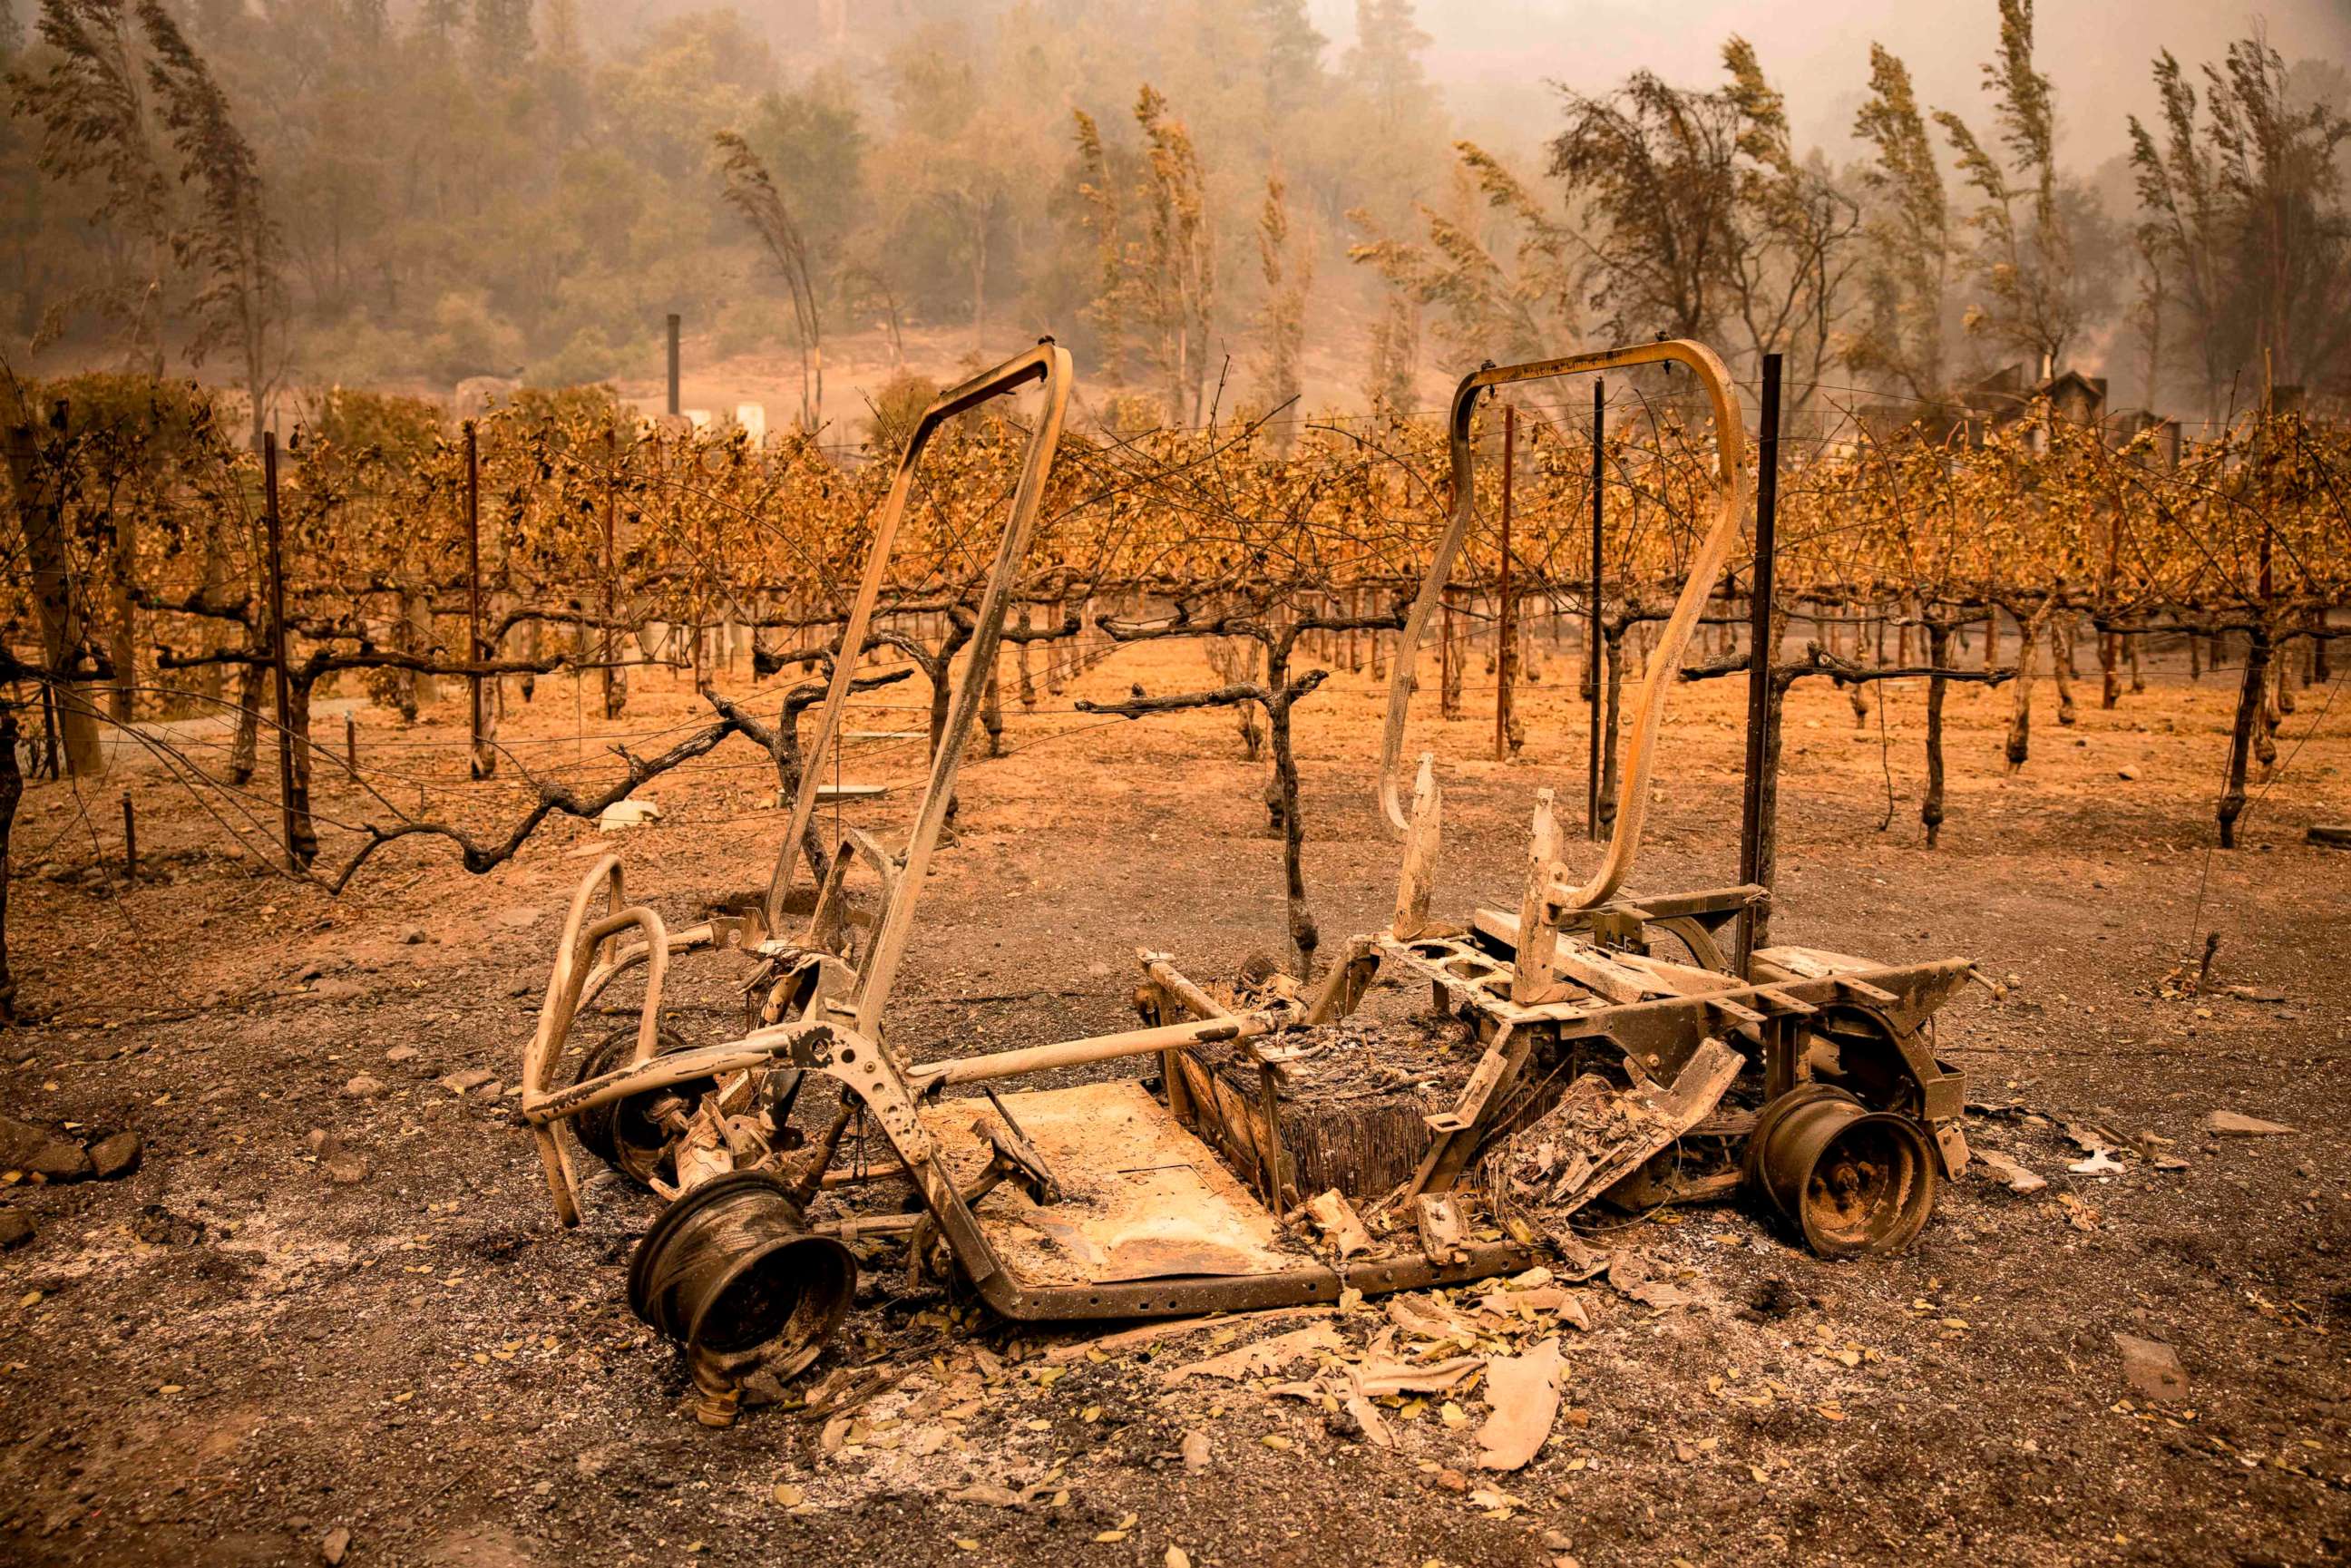 PHOTO: The remains of a golf cart burned by the Glass Fire sits next to a vineyard at Calistoga Ranch in Calistoga, Napa Valley, Calif., Sept. 30, 2020.